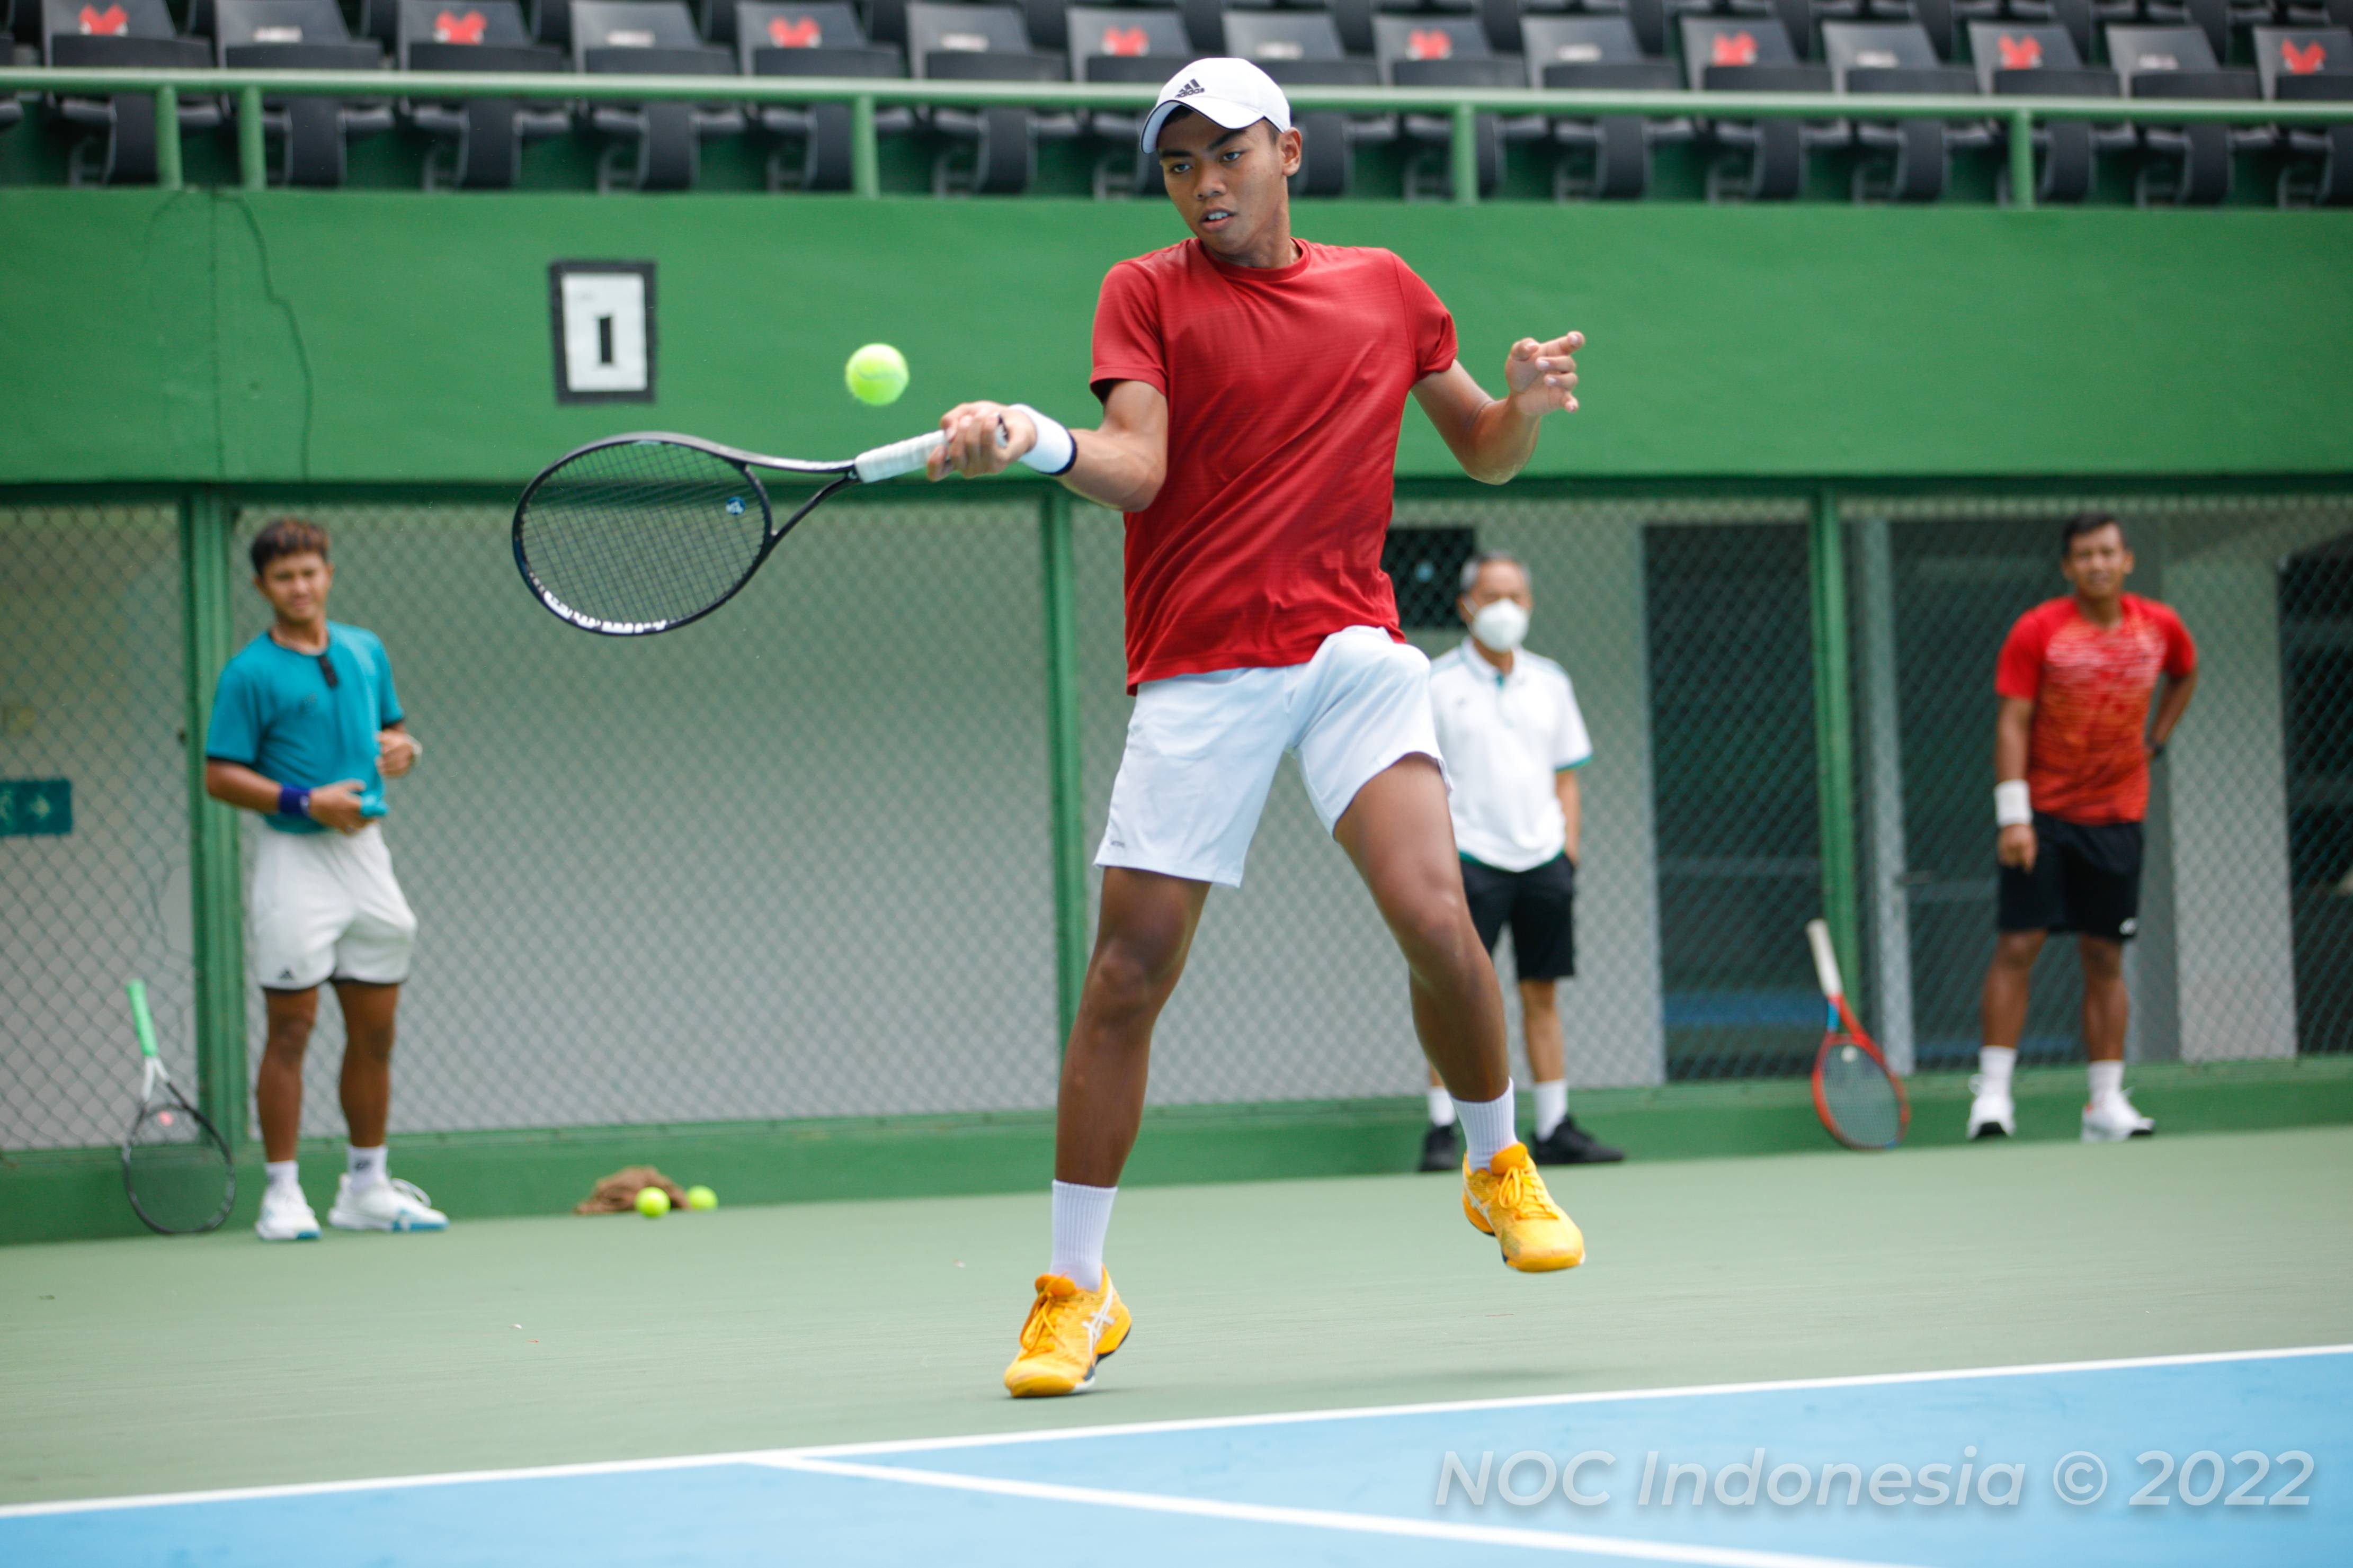 Tennis ask for support from CdM Team and NOC Indonesia - Indonesia Olympic Commitee